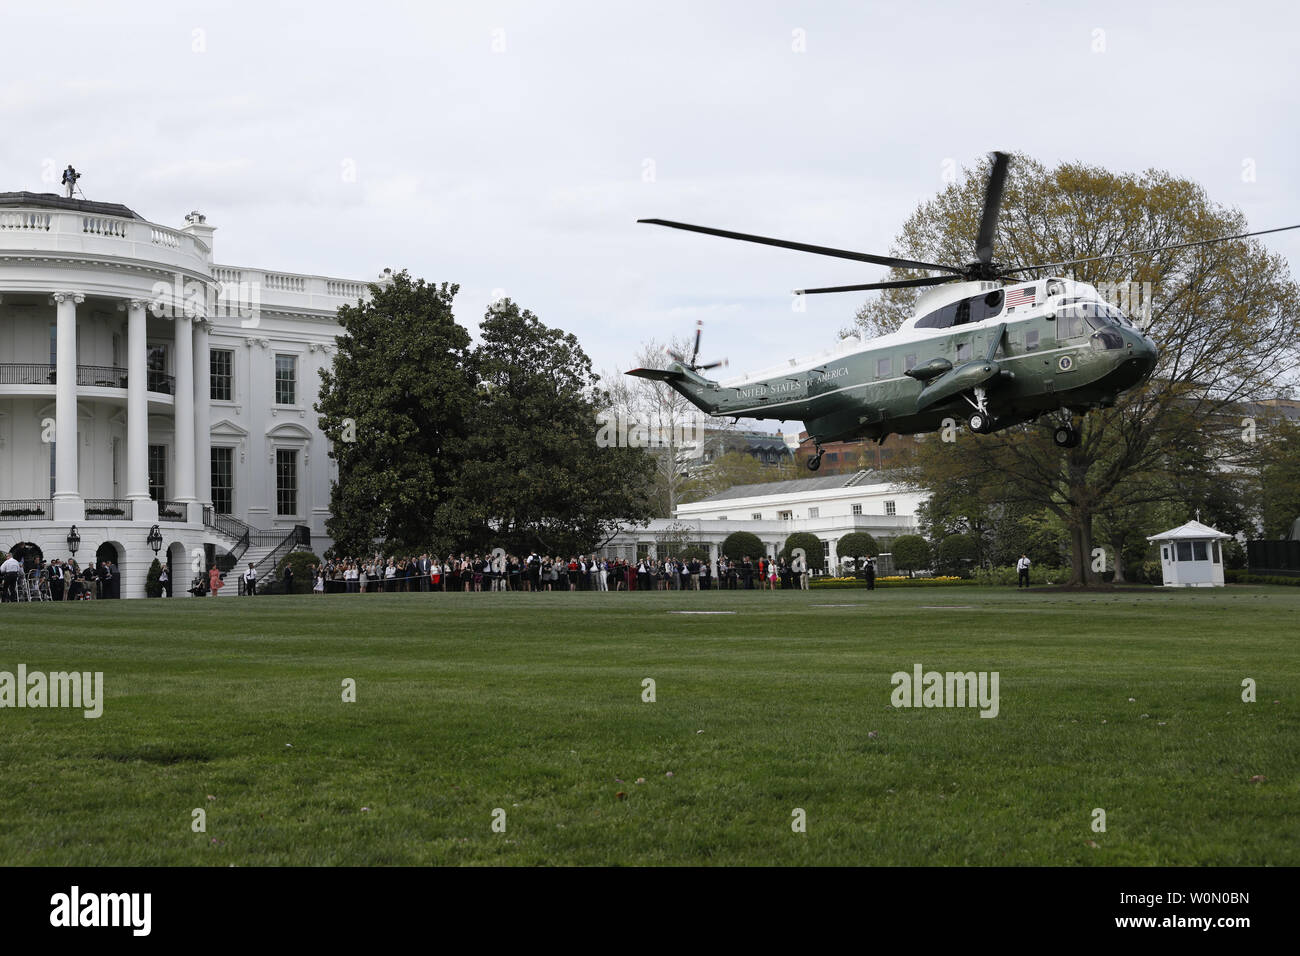 Marine One helicopter with U.S. President Donald Trump, France's President Emmanuel Macron and First Ladies Melania Trump and Brigitte Macron on board departs on the South Lawn of the White House in Washington, DC on April 23, 2018. As Macron arrives for his first state visit of Trump's presidency, the U.S. leader is threatening to upend the global trading system with tariffs on China, maybe Europe too.       Photo by Yuri Gripas/UPI Stock Photo